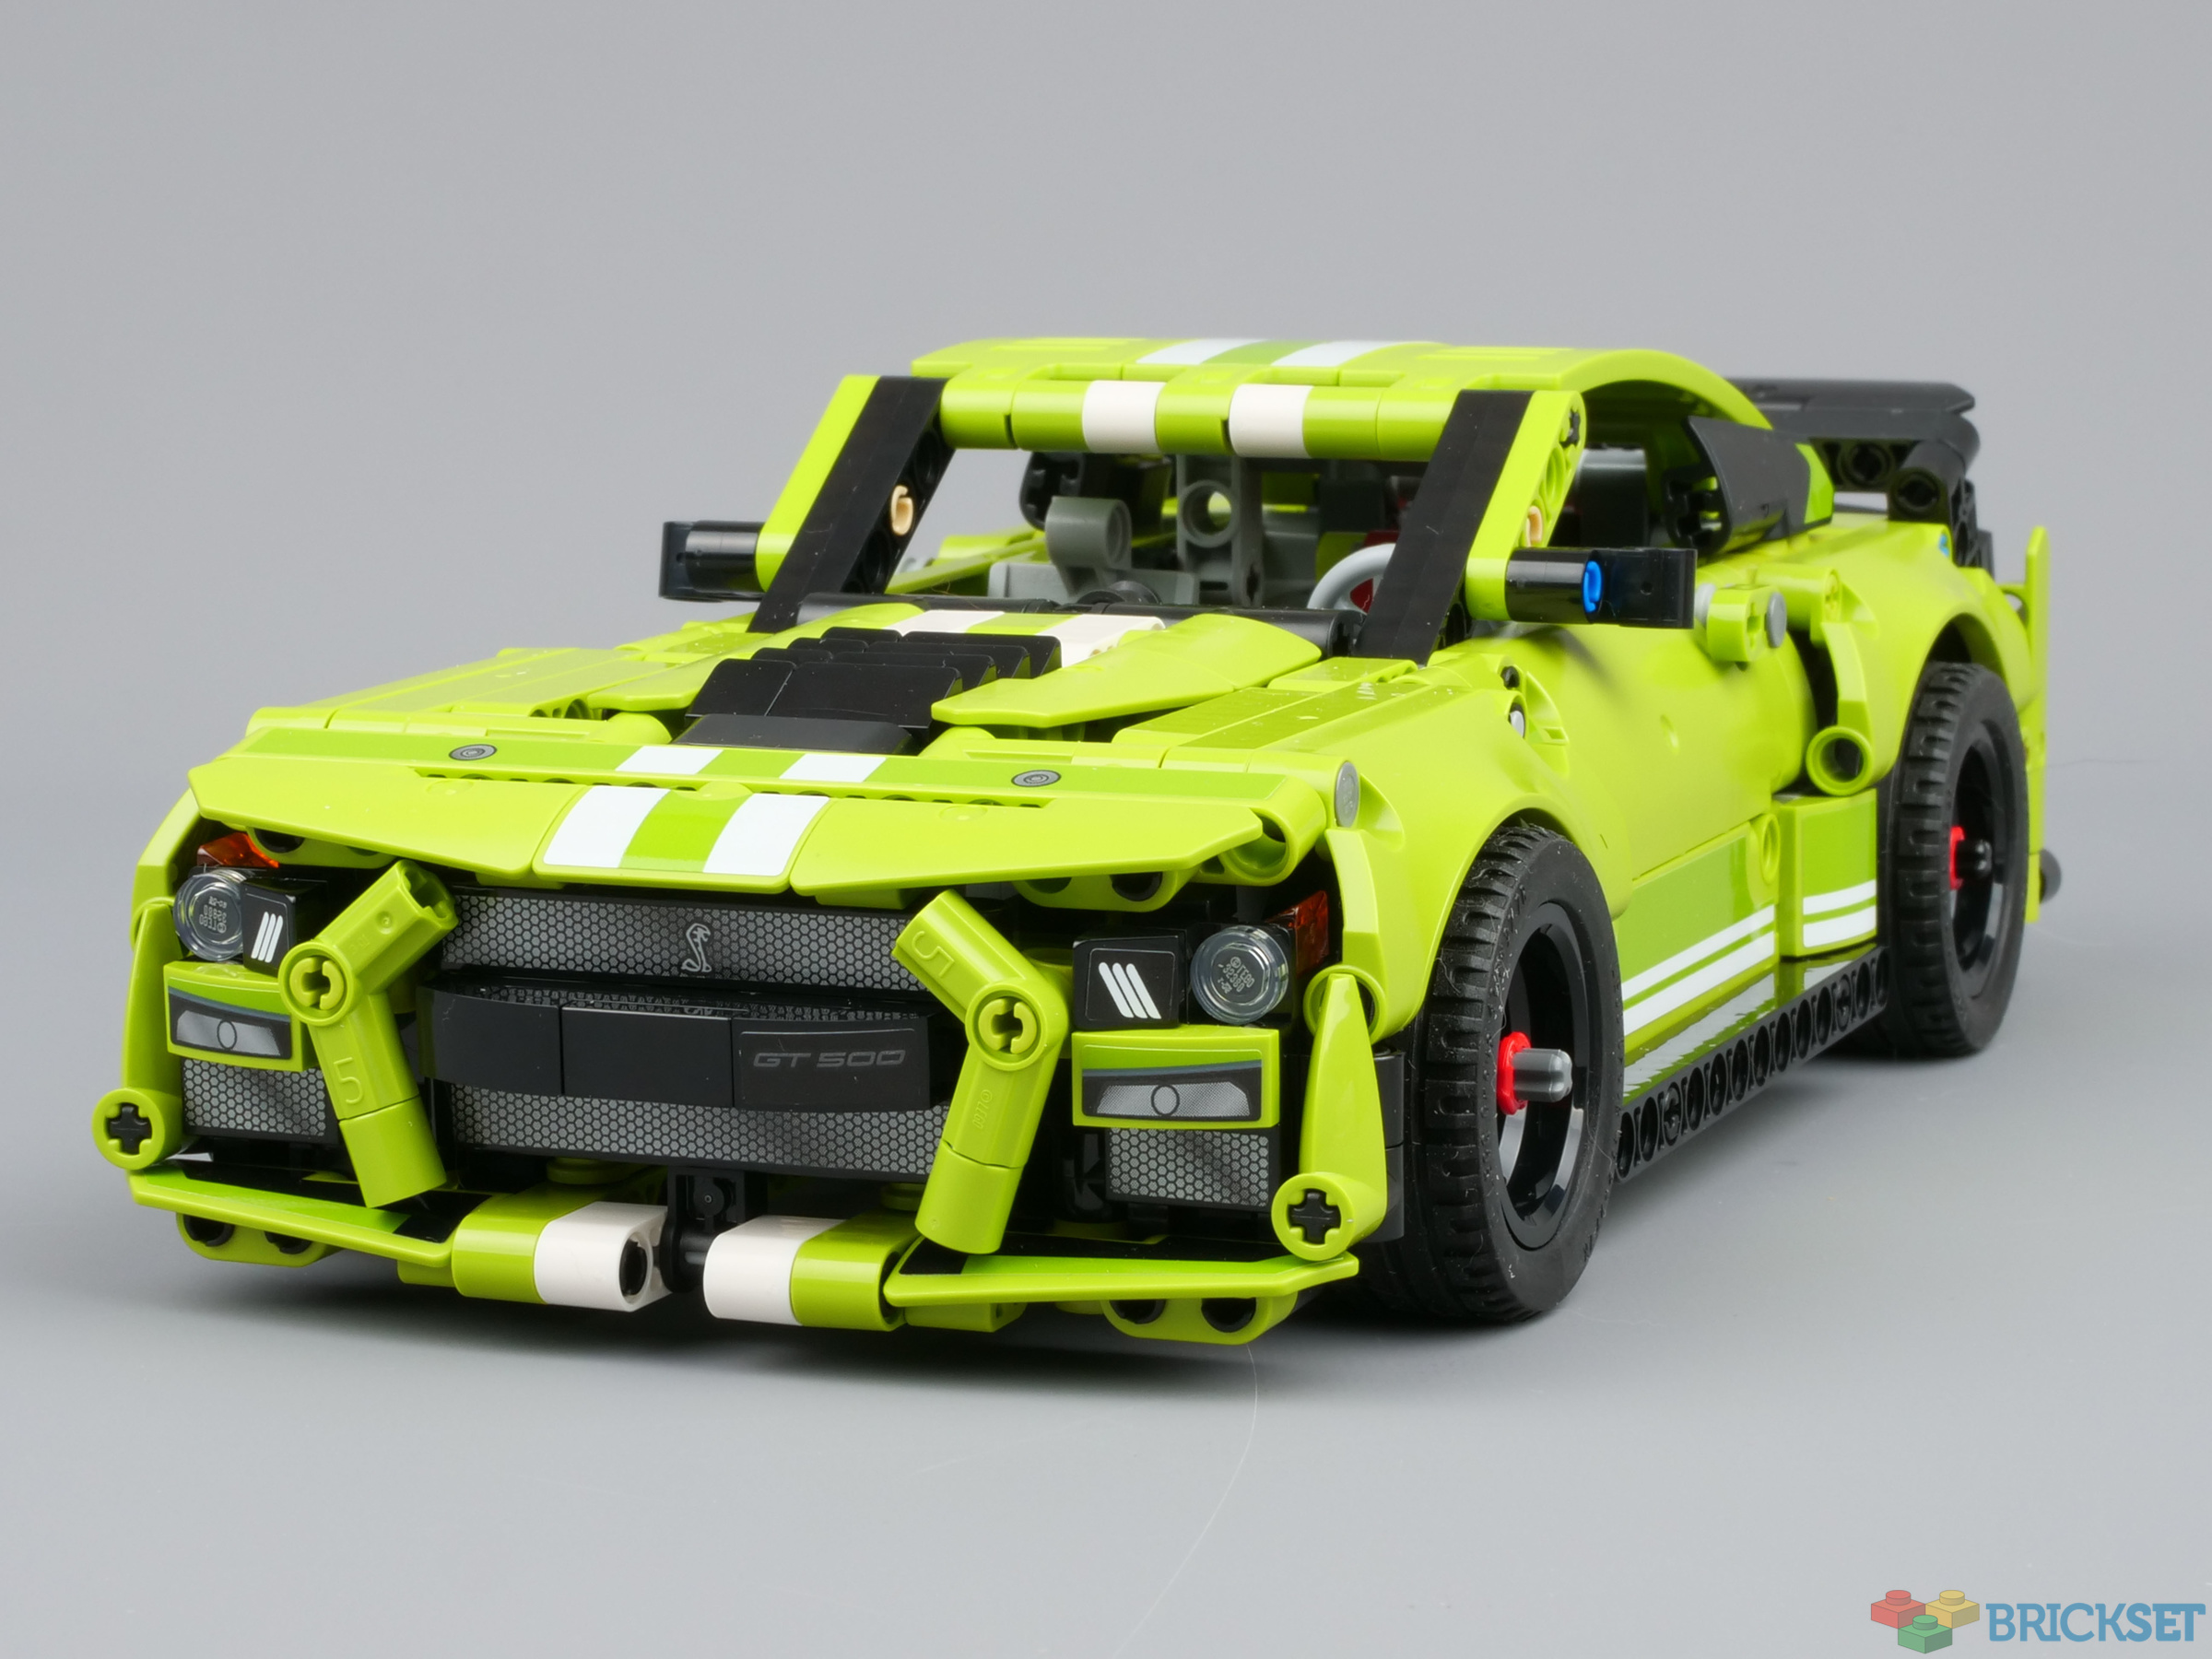 LEGO 42138 Ford Mustang Shelby GT500 review